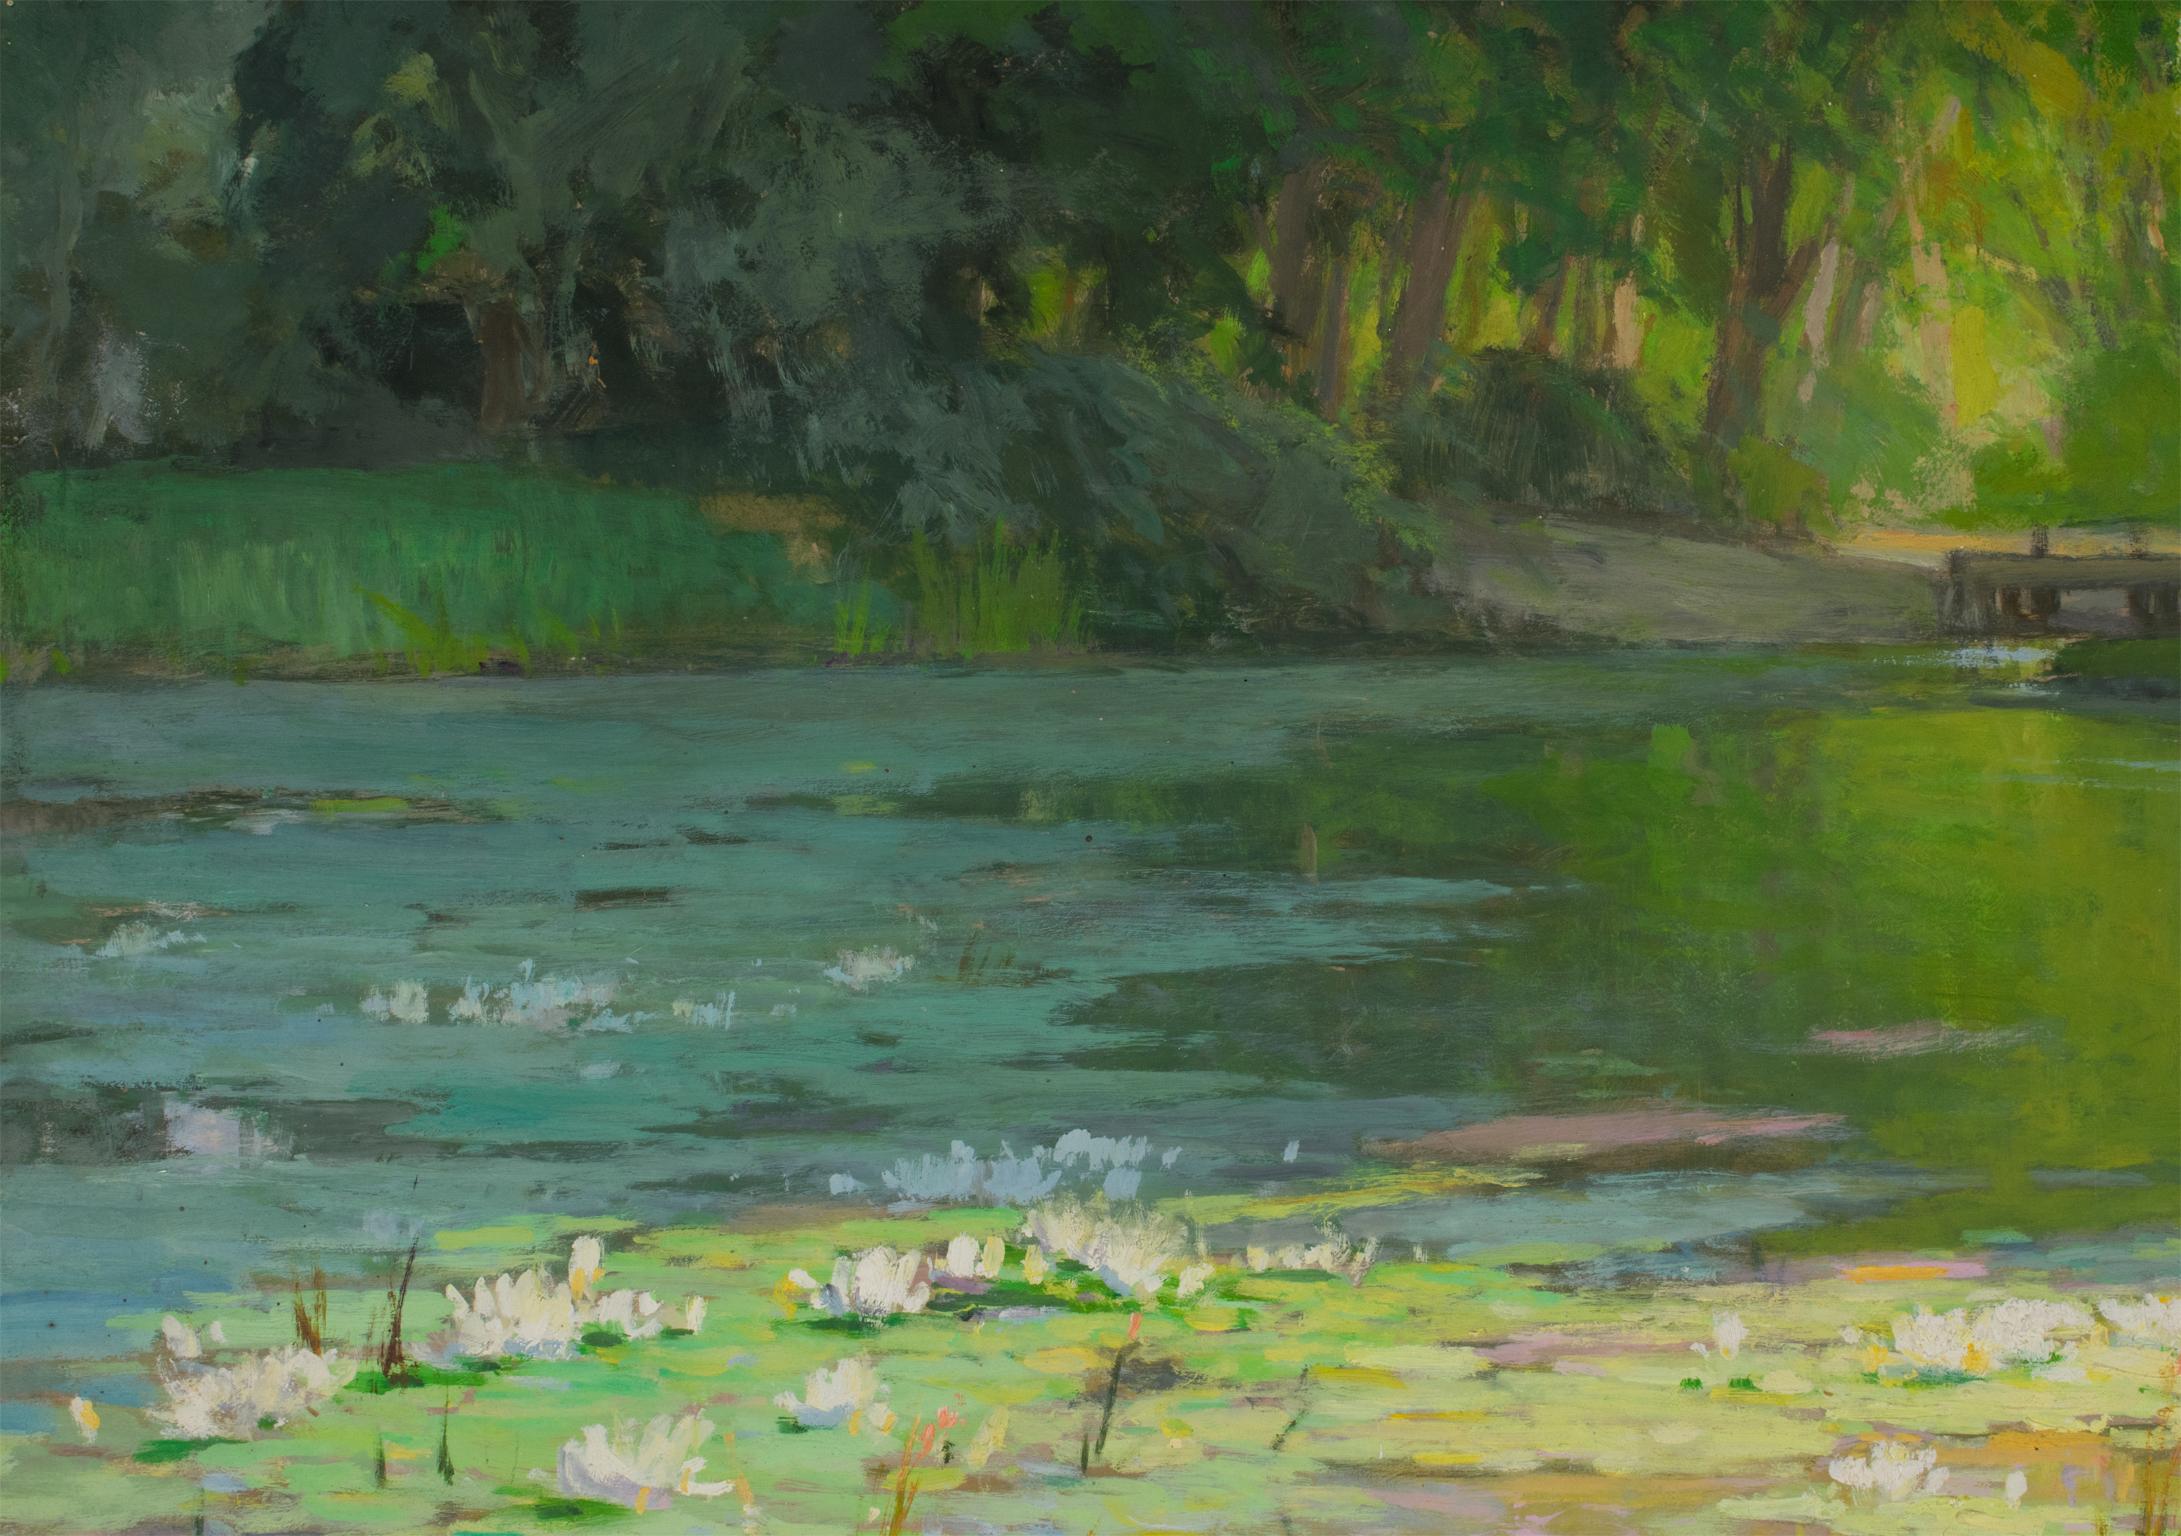 The Water Lilies, Oil on Masonite Board Painting by Pierre Laurent Baeschlin 8